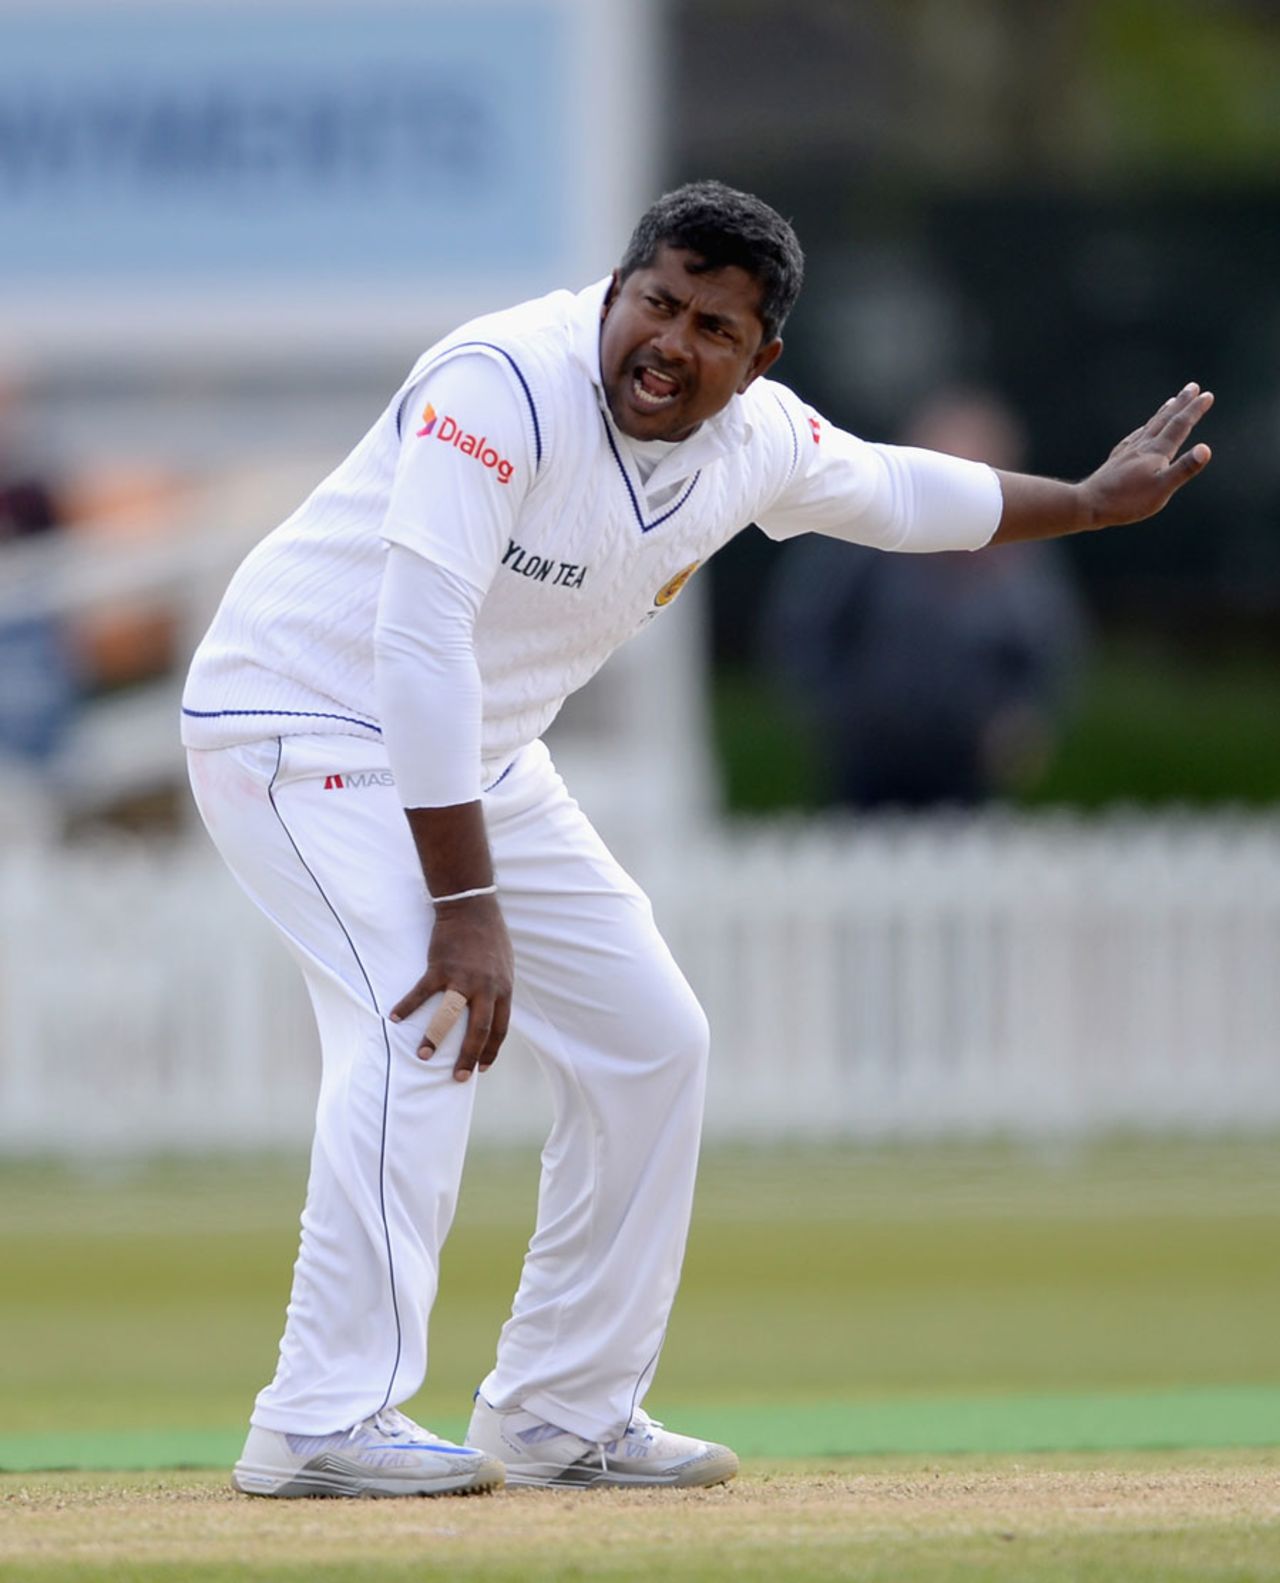 Rangana Herath removed both openers, Leicestershire v Sri Lankans, Tour match, Grace Road, 2nd day, May 14, 2016